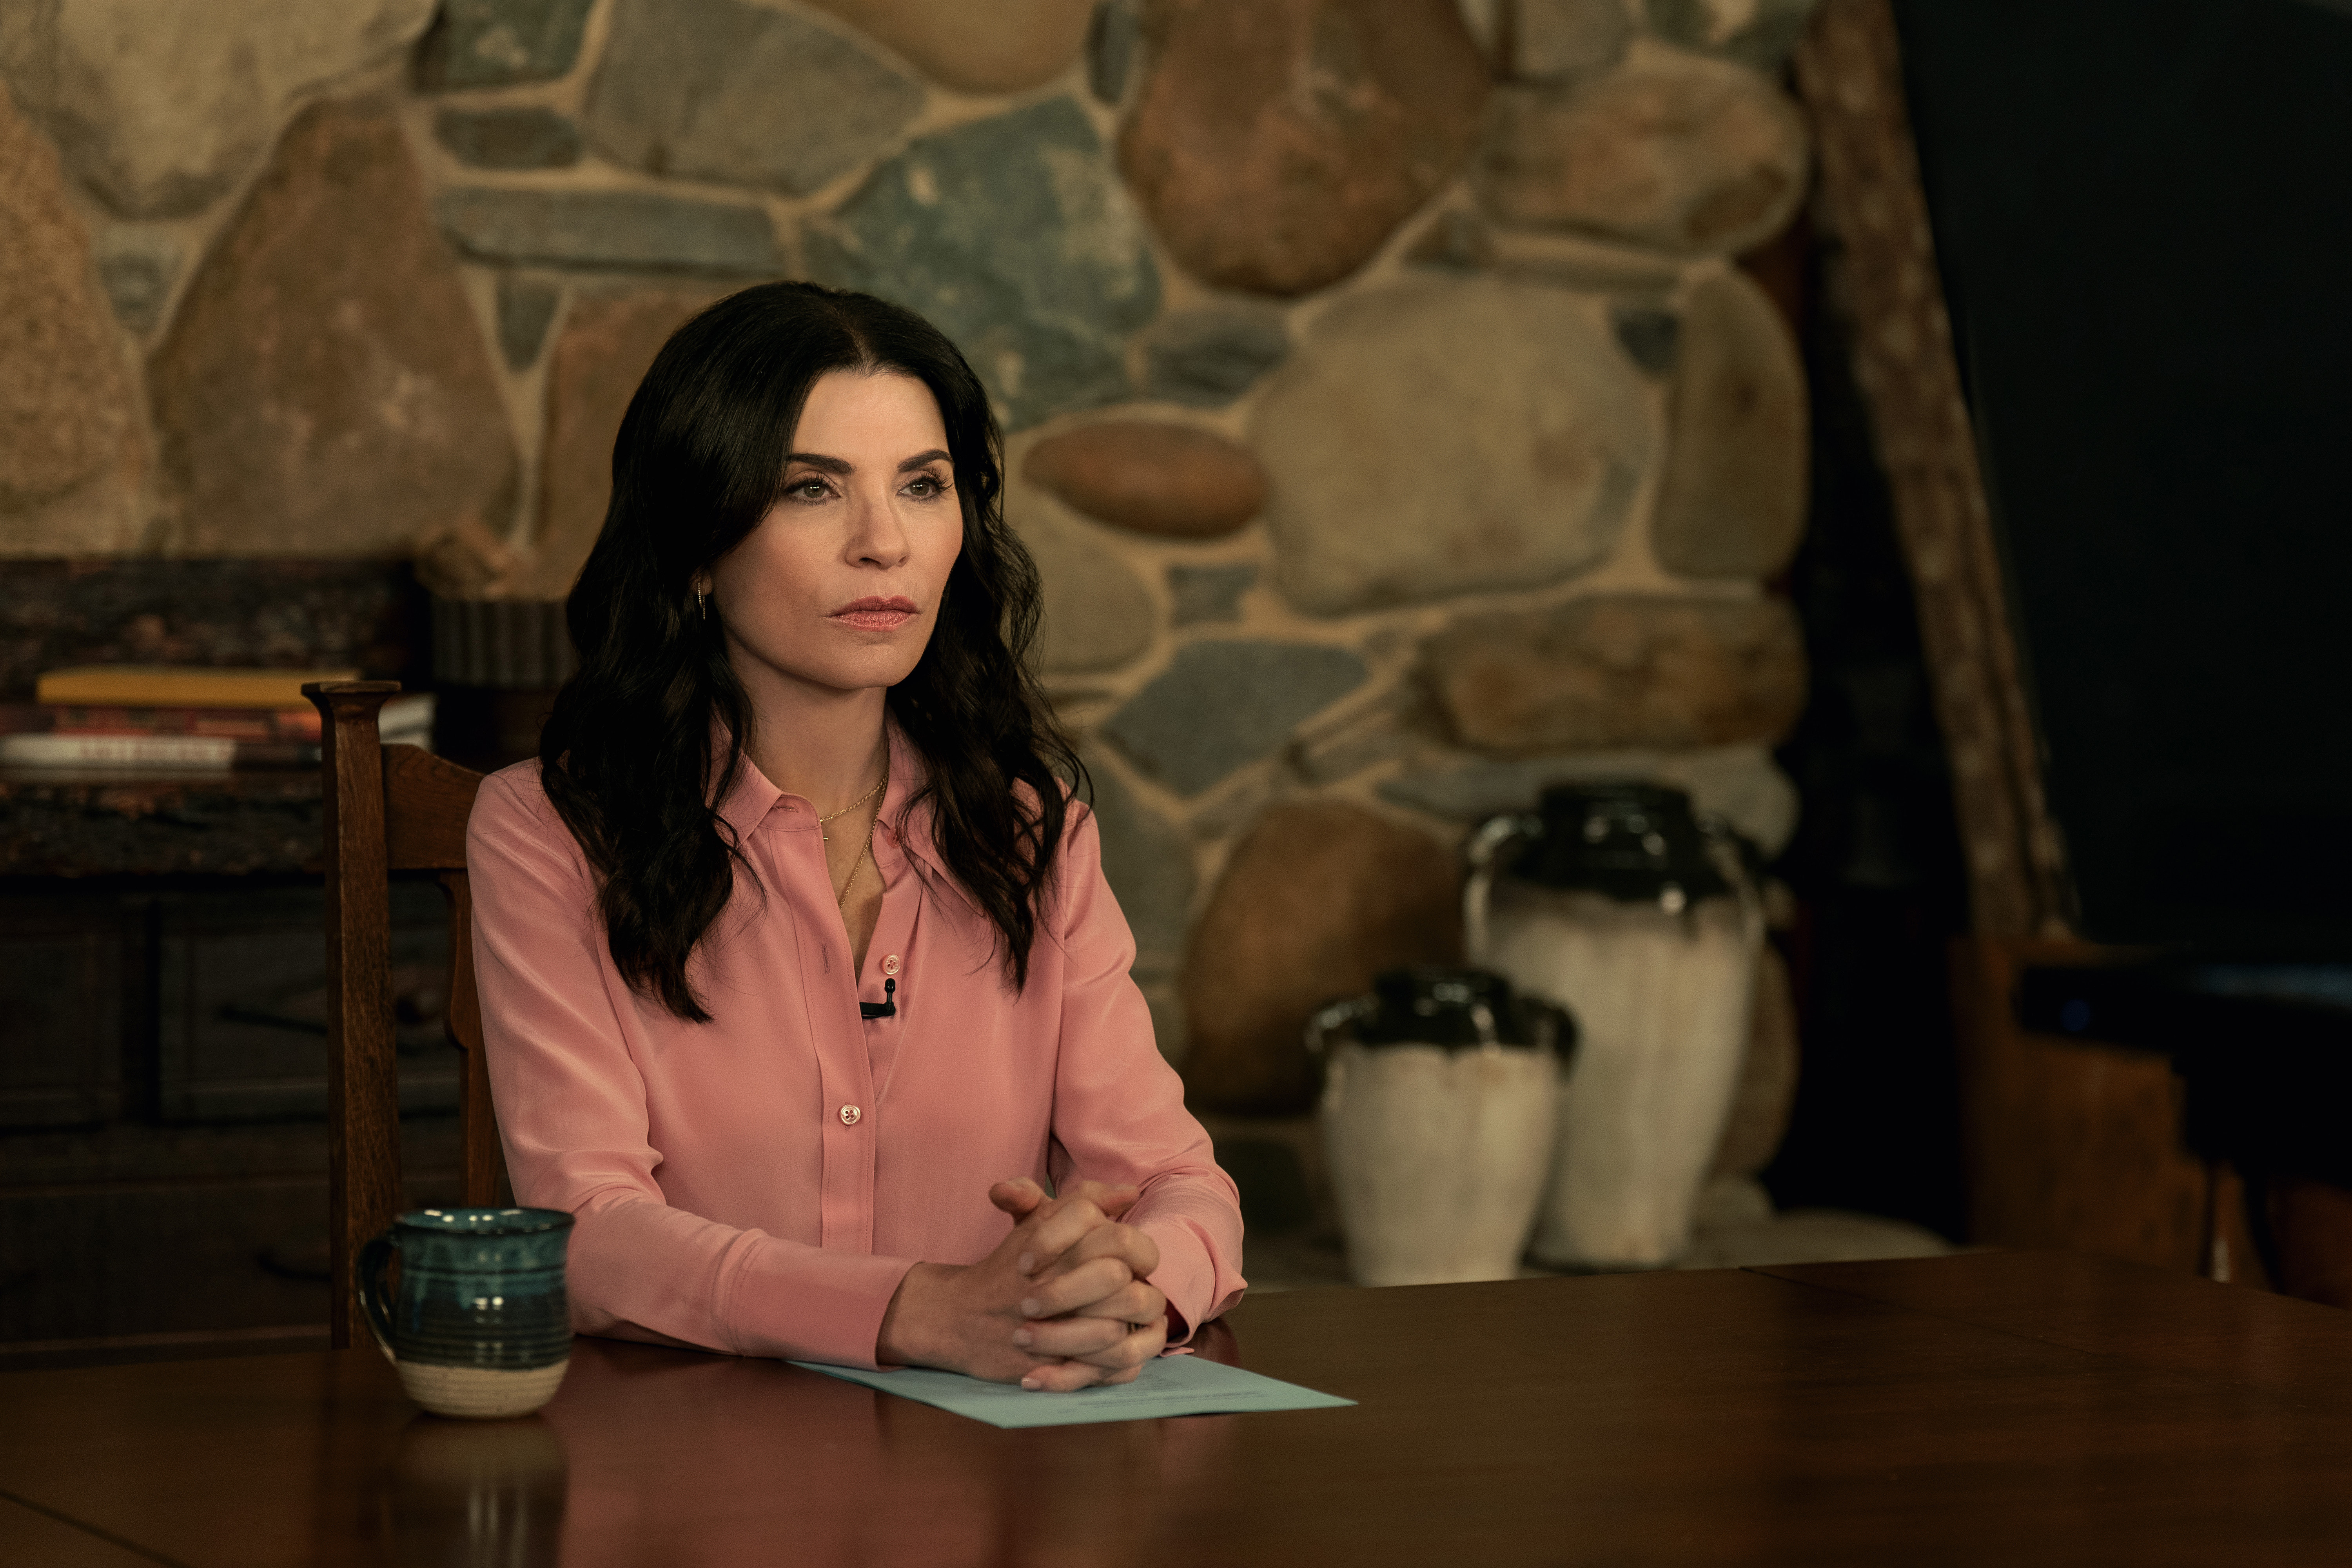 The Morning Show 3x05 Julianna Margulies as Laura Peterson